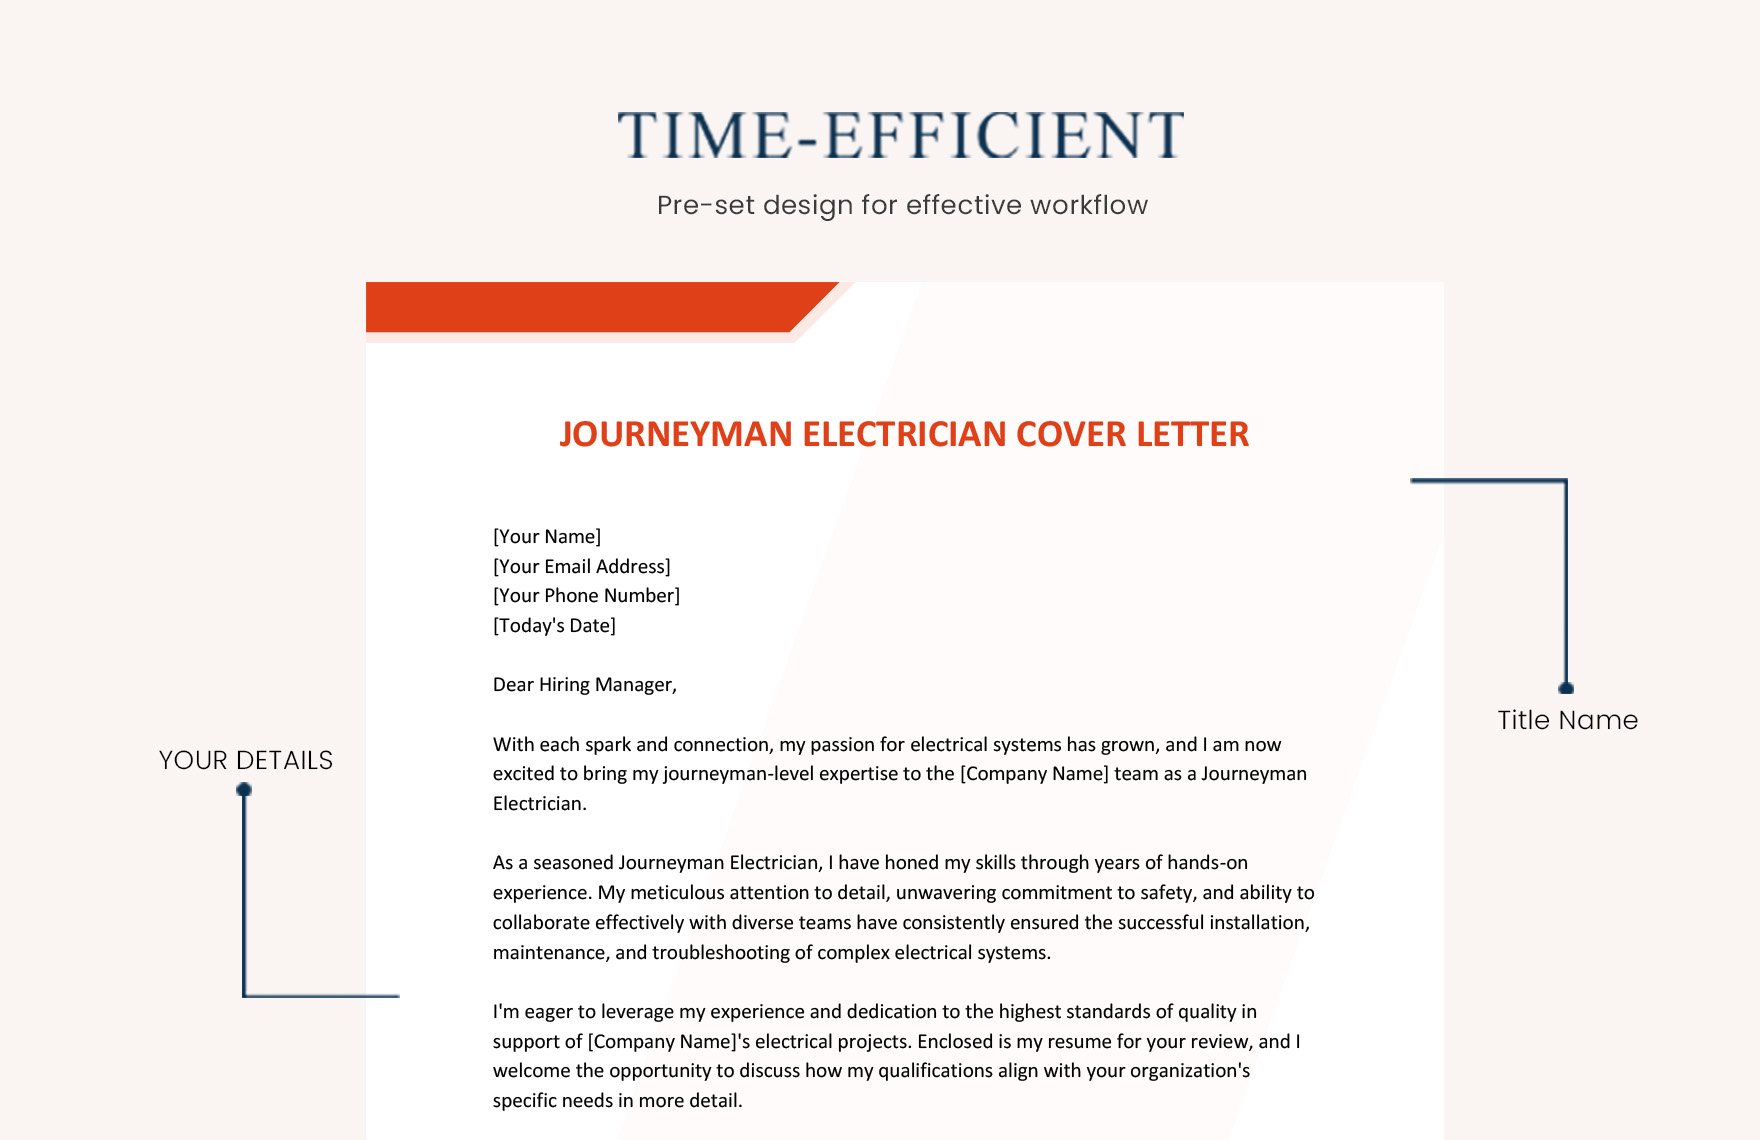 Journeyman Electrician Cover Letter